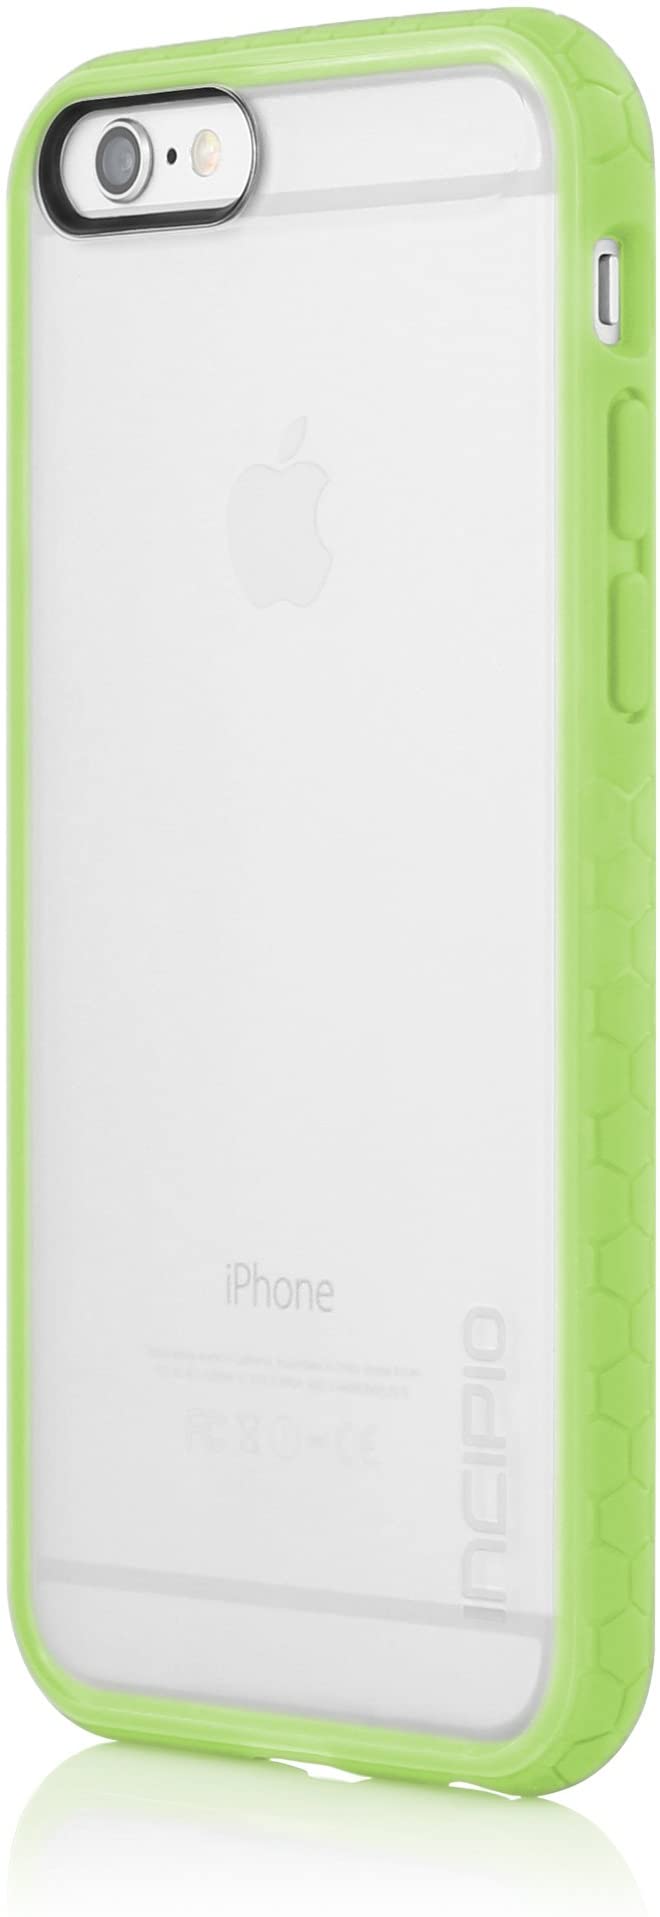 Incipio Octane Case for Apple iPhone 6 - Retail Packaging - Frost/Green